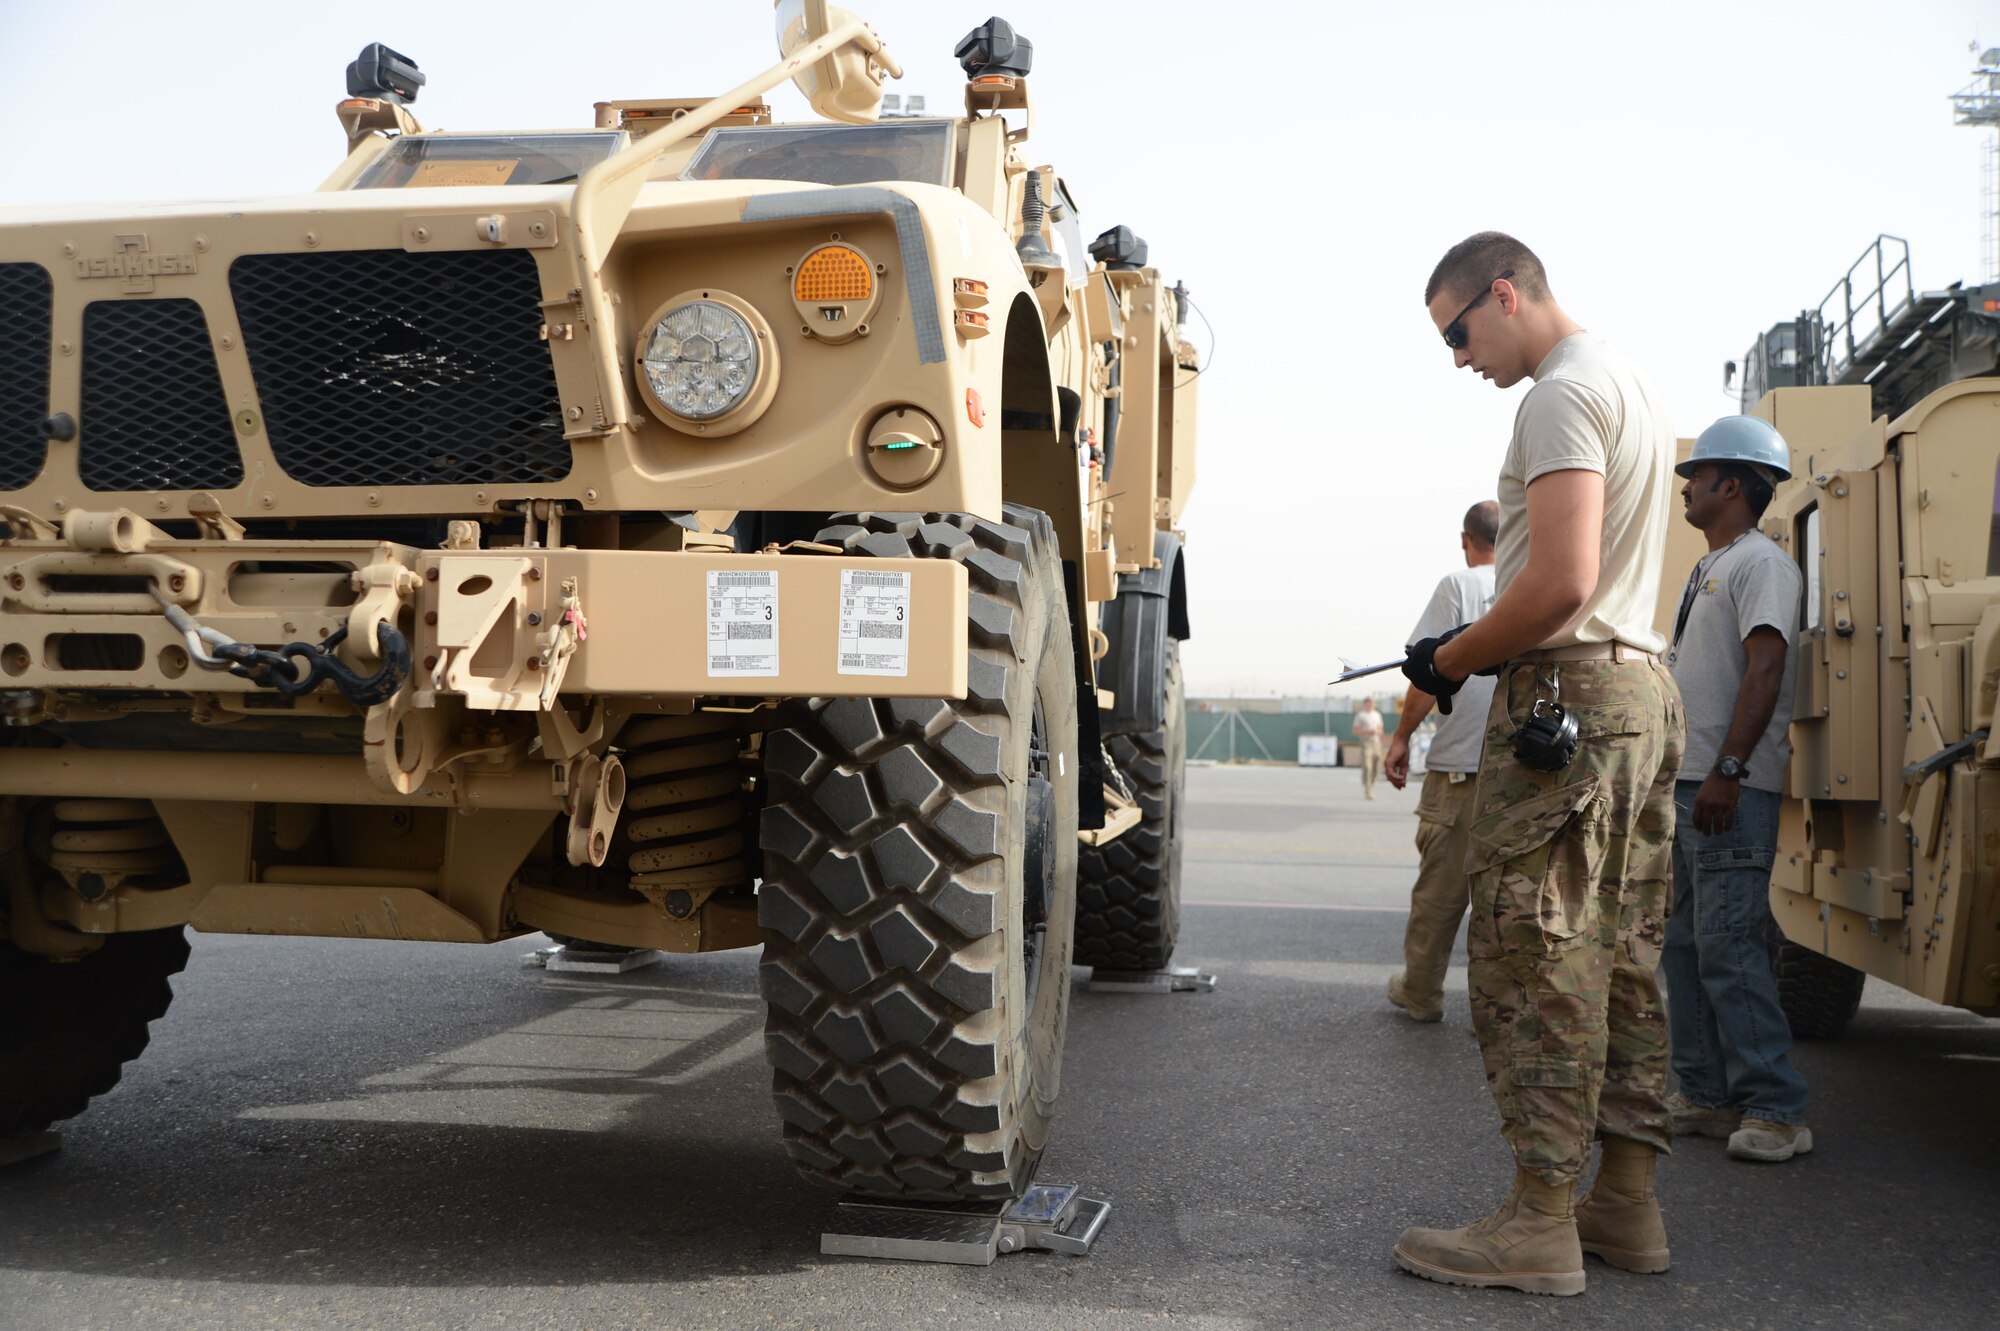 U.S. Air Force Tech. Sgt. Chaz Jensby, a night shift supervisor assigned to the 455th Expeditionary Aerial Port Squadron Detachment 1, checks the weight of the front driver side axel of a Mine Resistant Ambush Protected All-Terrain Vehicle as part of inspection procedures at Mazar-e Sharif, Afghanistan June 24, 2014. Before accepting vehicles for shipment, Jensby is responsible for ensuring the weight matches the shipping paperwork and the vehicles are cleaned. If these aren’t done, the vehicle is returned to the customer. Jensby, a native of Lincoln, Neb., is a reservist deployed from the 155th Air Refueling Wing, Lincoln, Neb. (U.S. Air Force photo by Master Sgt. Cohen A. Young/Released)  